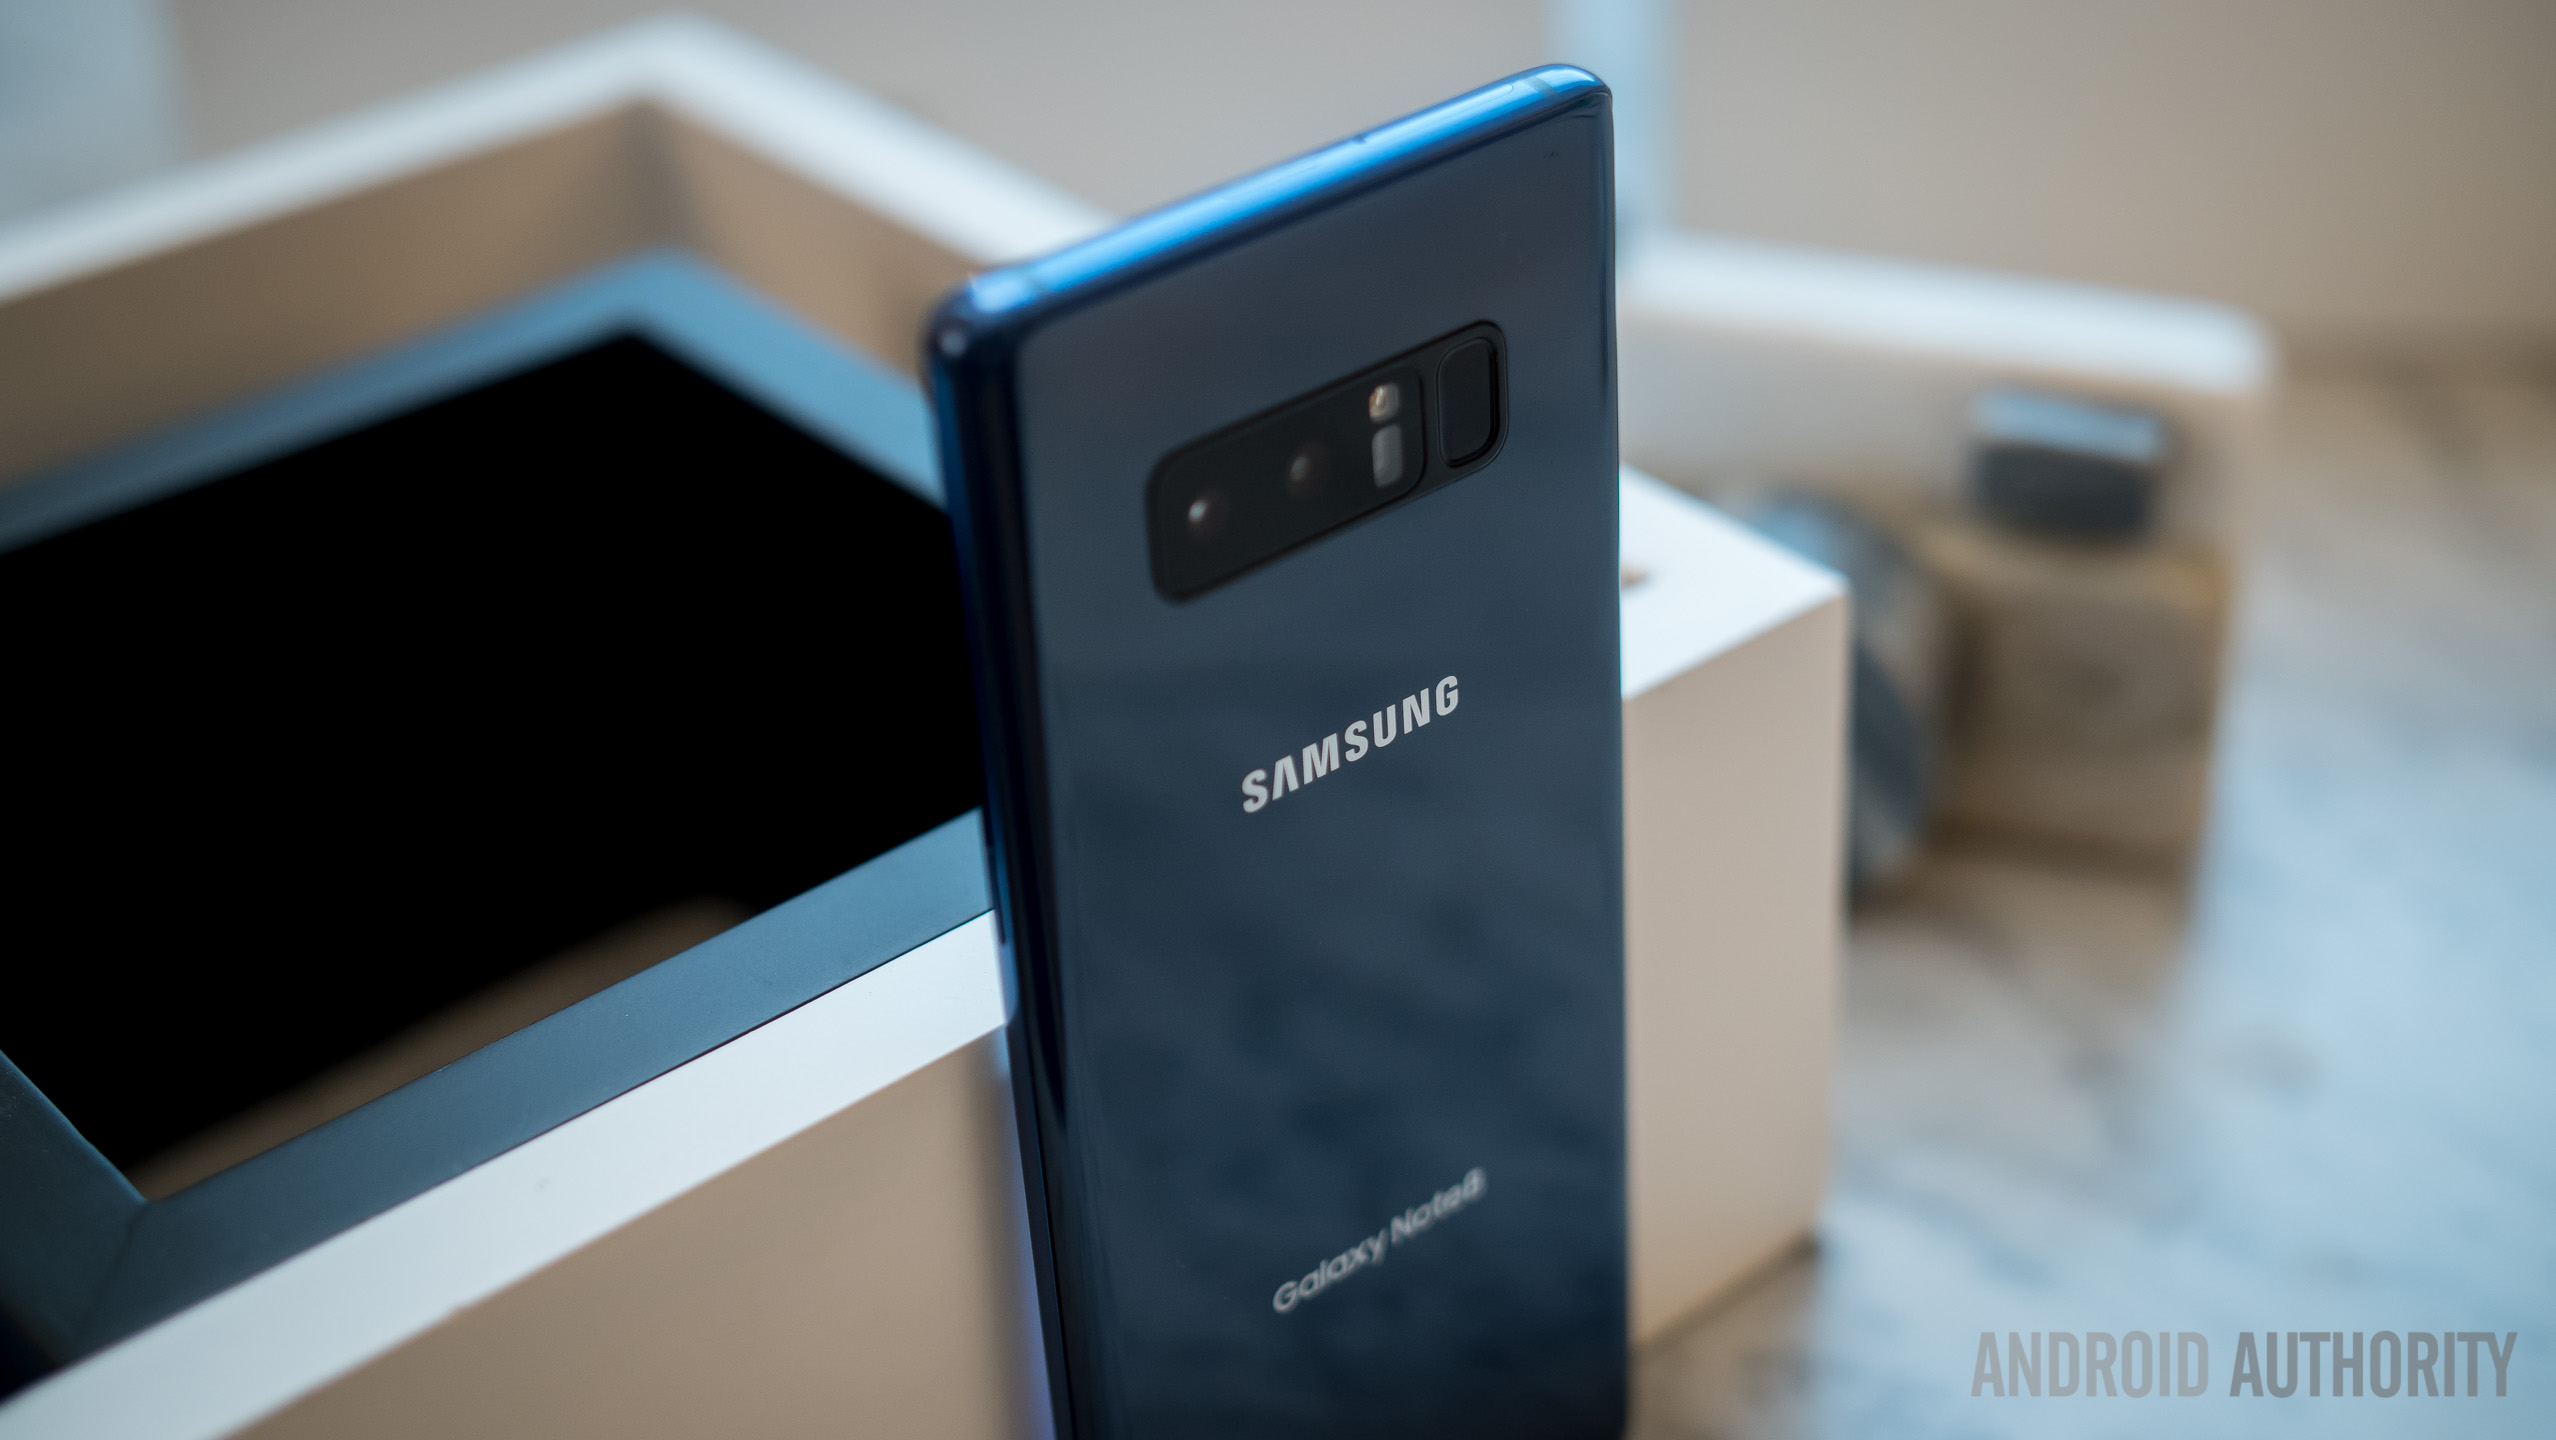 How to insert a microSD card into Galaxy Note 8